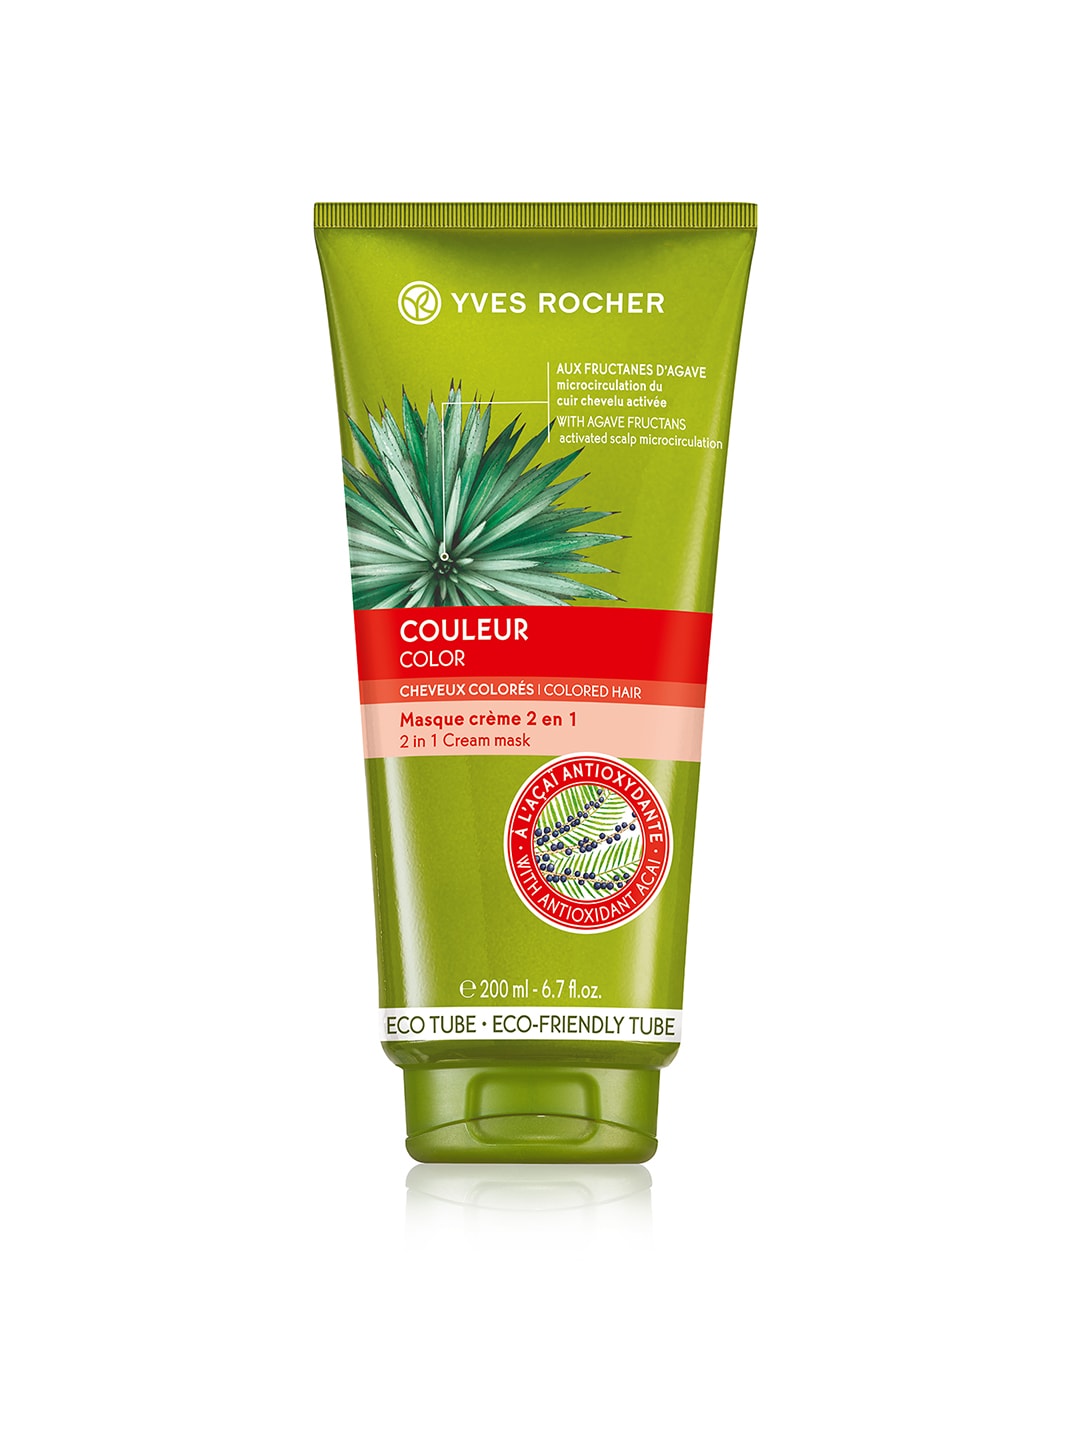 YVES ROCHER Colour 2 in 1 Sustainable Hair Cream Mask 200 ml Price in India